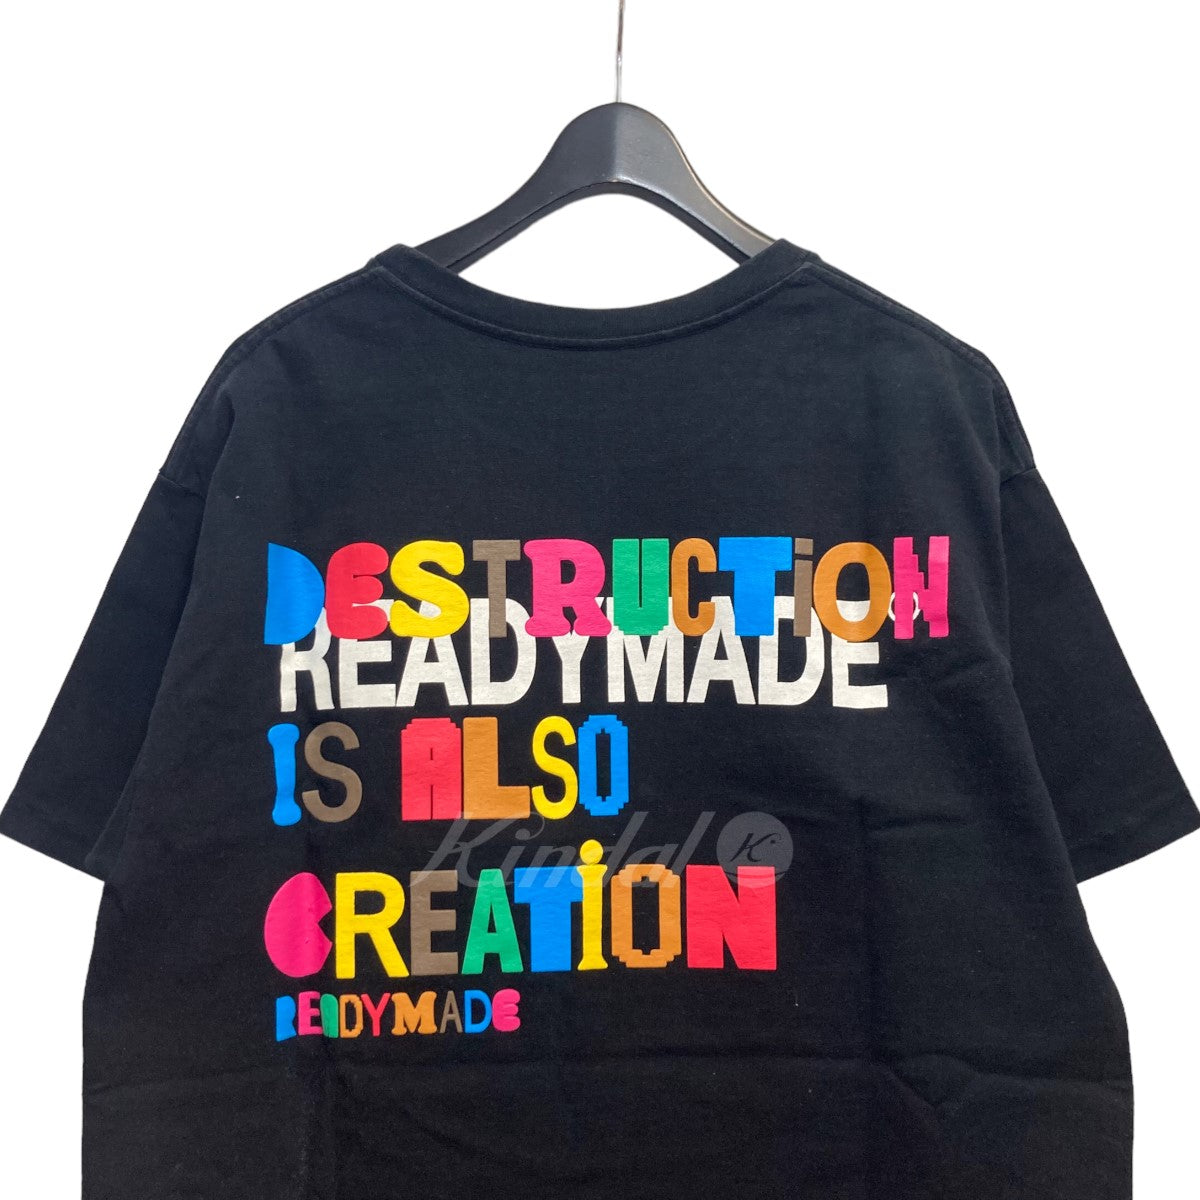 READYMADE(レディメイド) 21SS「COLLAPSED FACE T-SHIRT」Tシャツ